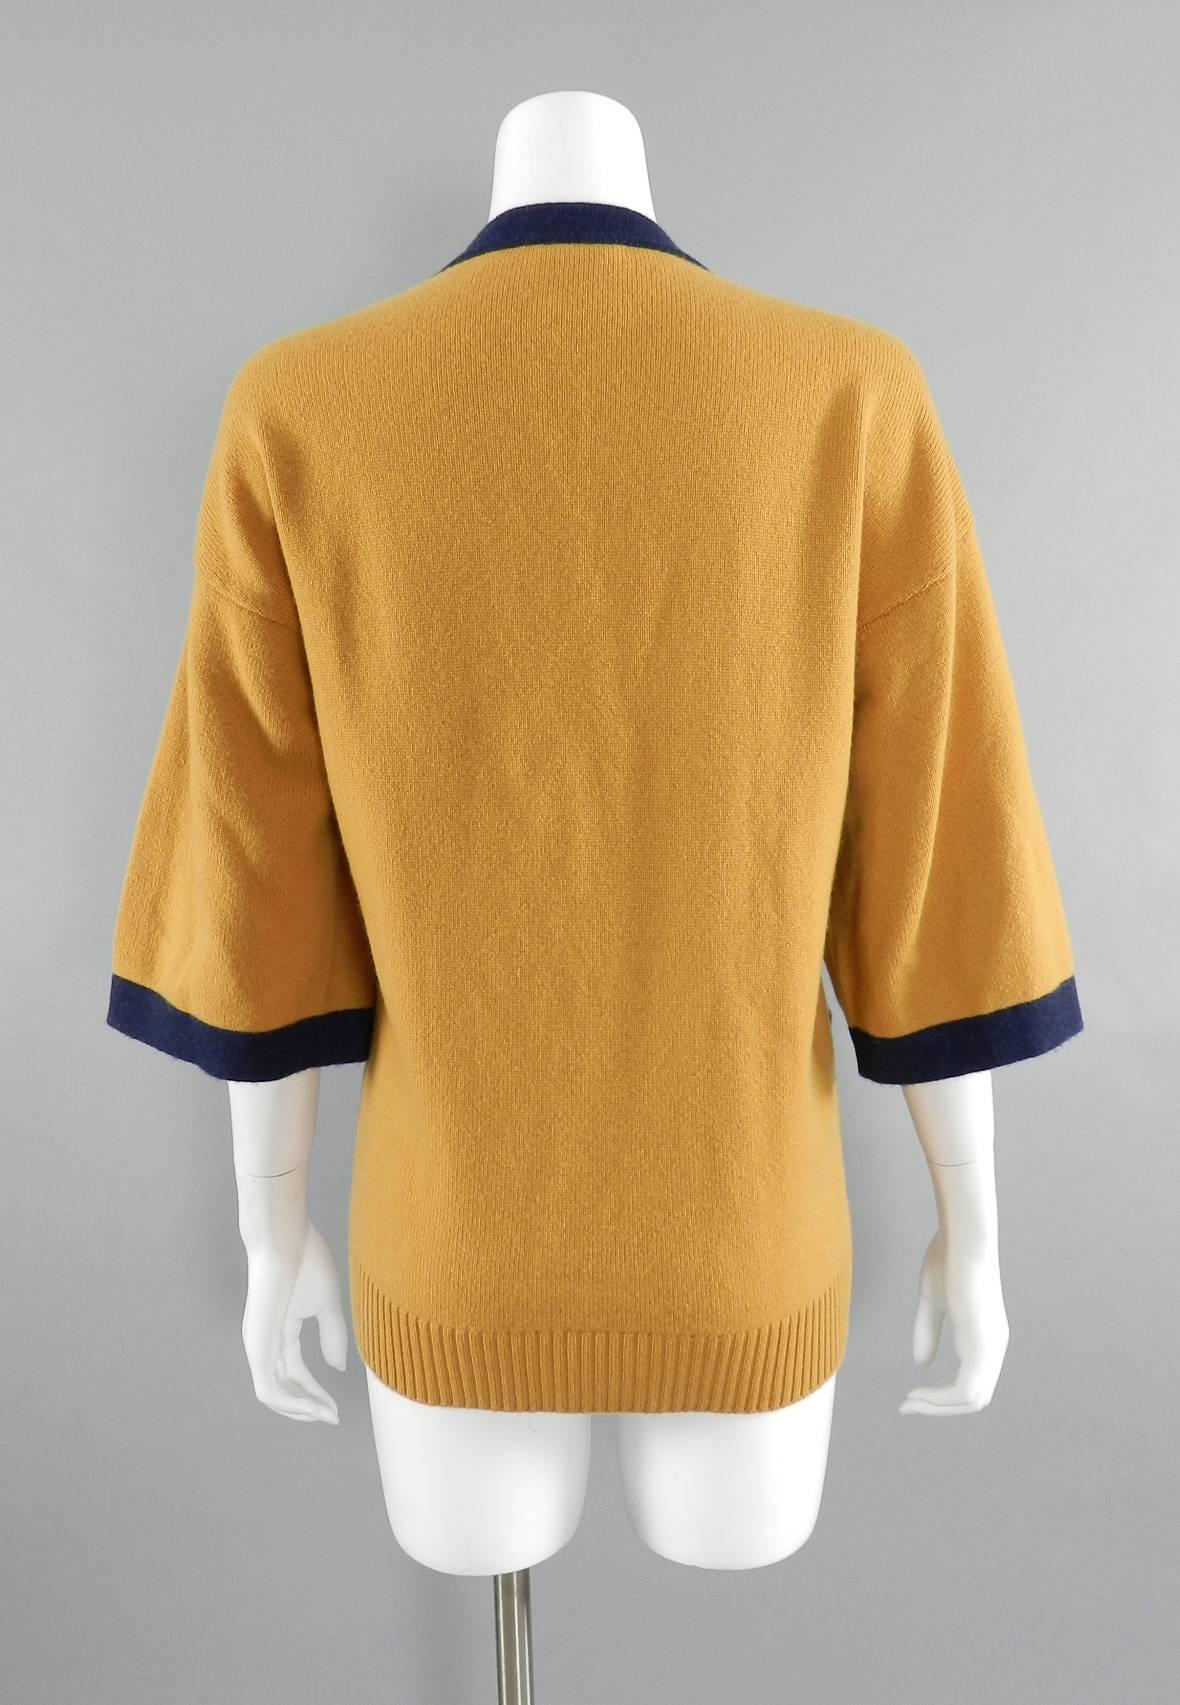 Women's Chanel mustard and navy V-neck Cashmere sweater